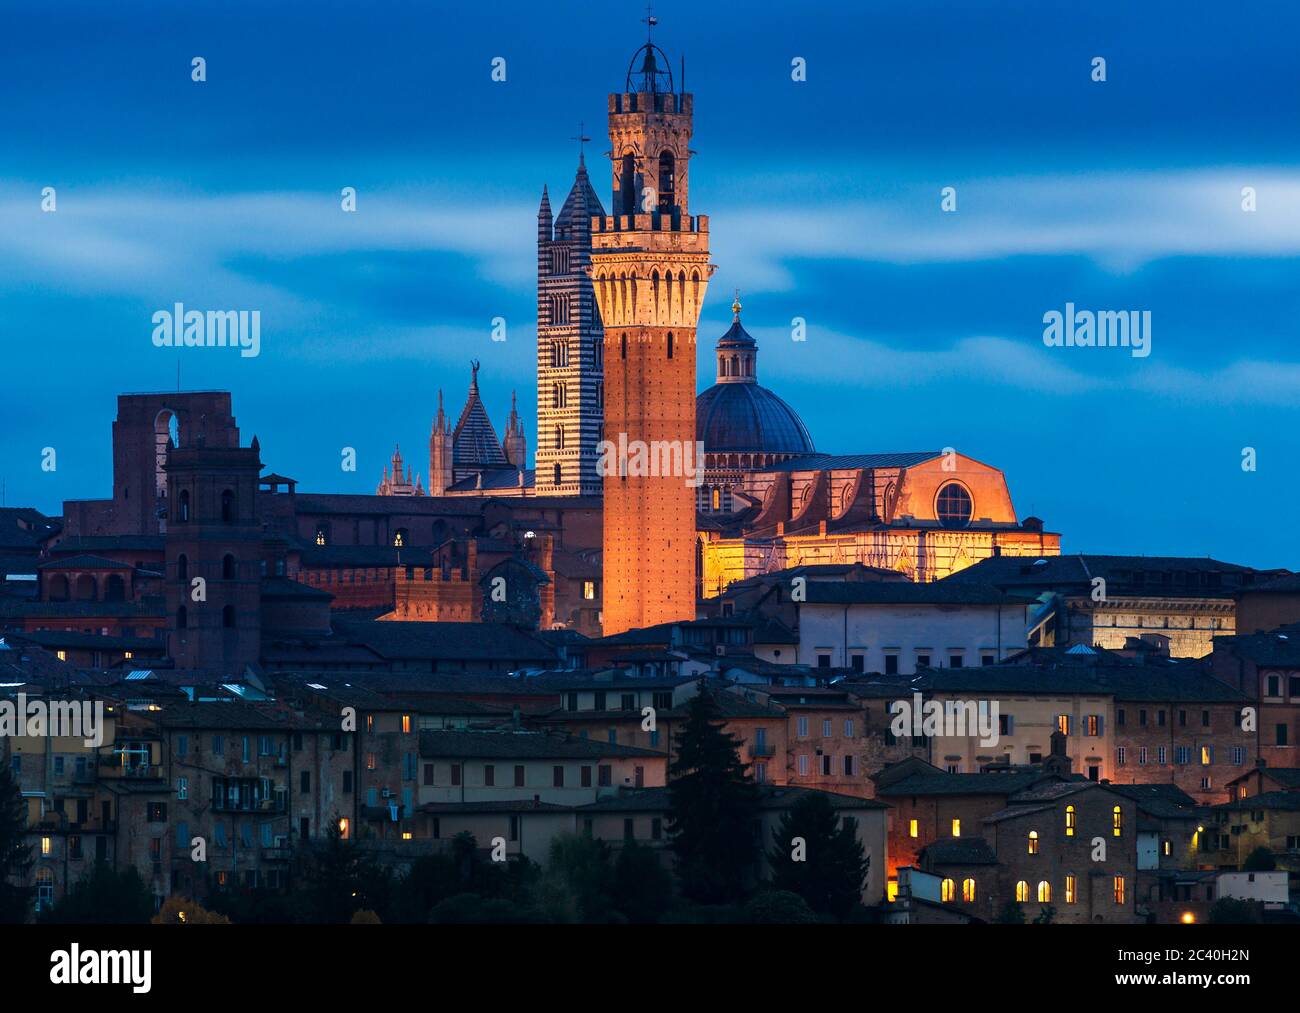 the skyline of Siena, Italy, shot at dusk with its famous tower in the foreground Stock Photo